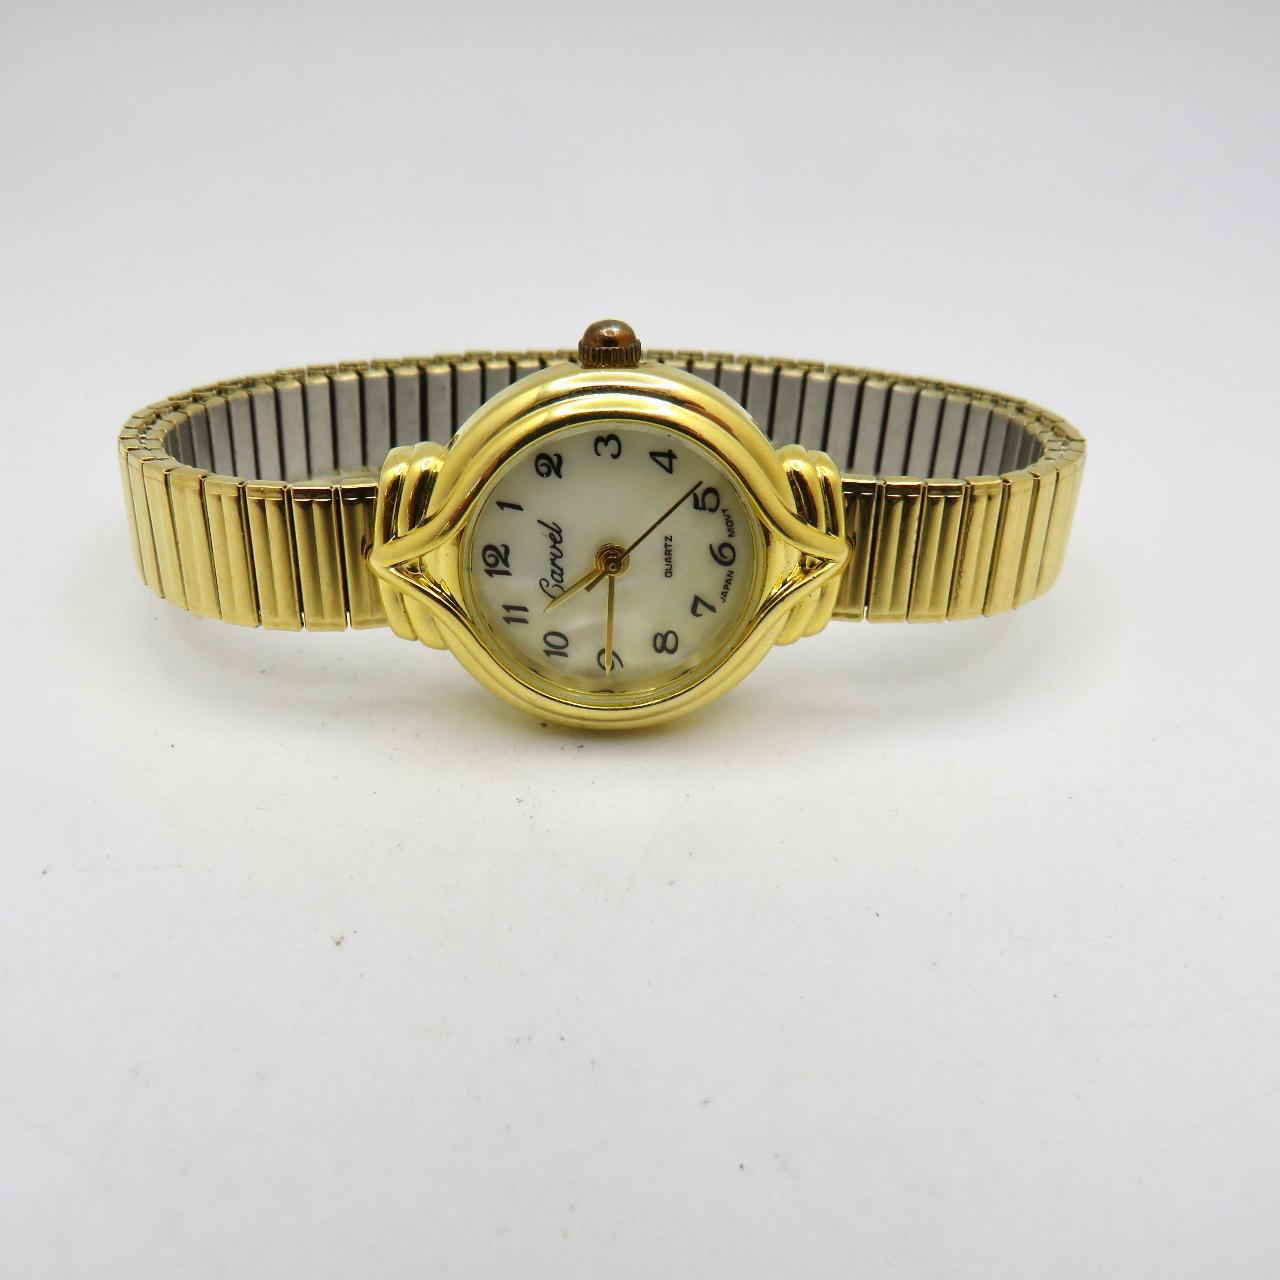 Sinn Unworn 18kt Gold Moonphase Wristwatch for $5,371 for sale from a  Private Seller on Chrono24